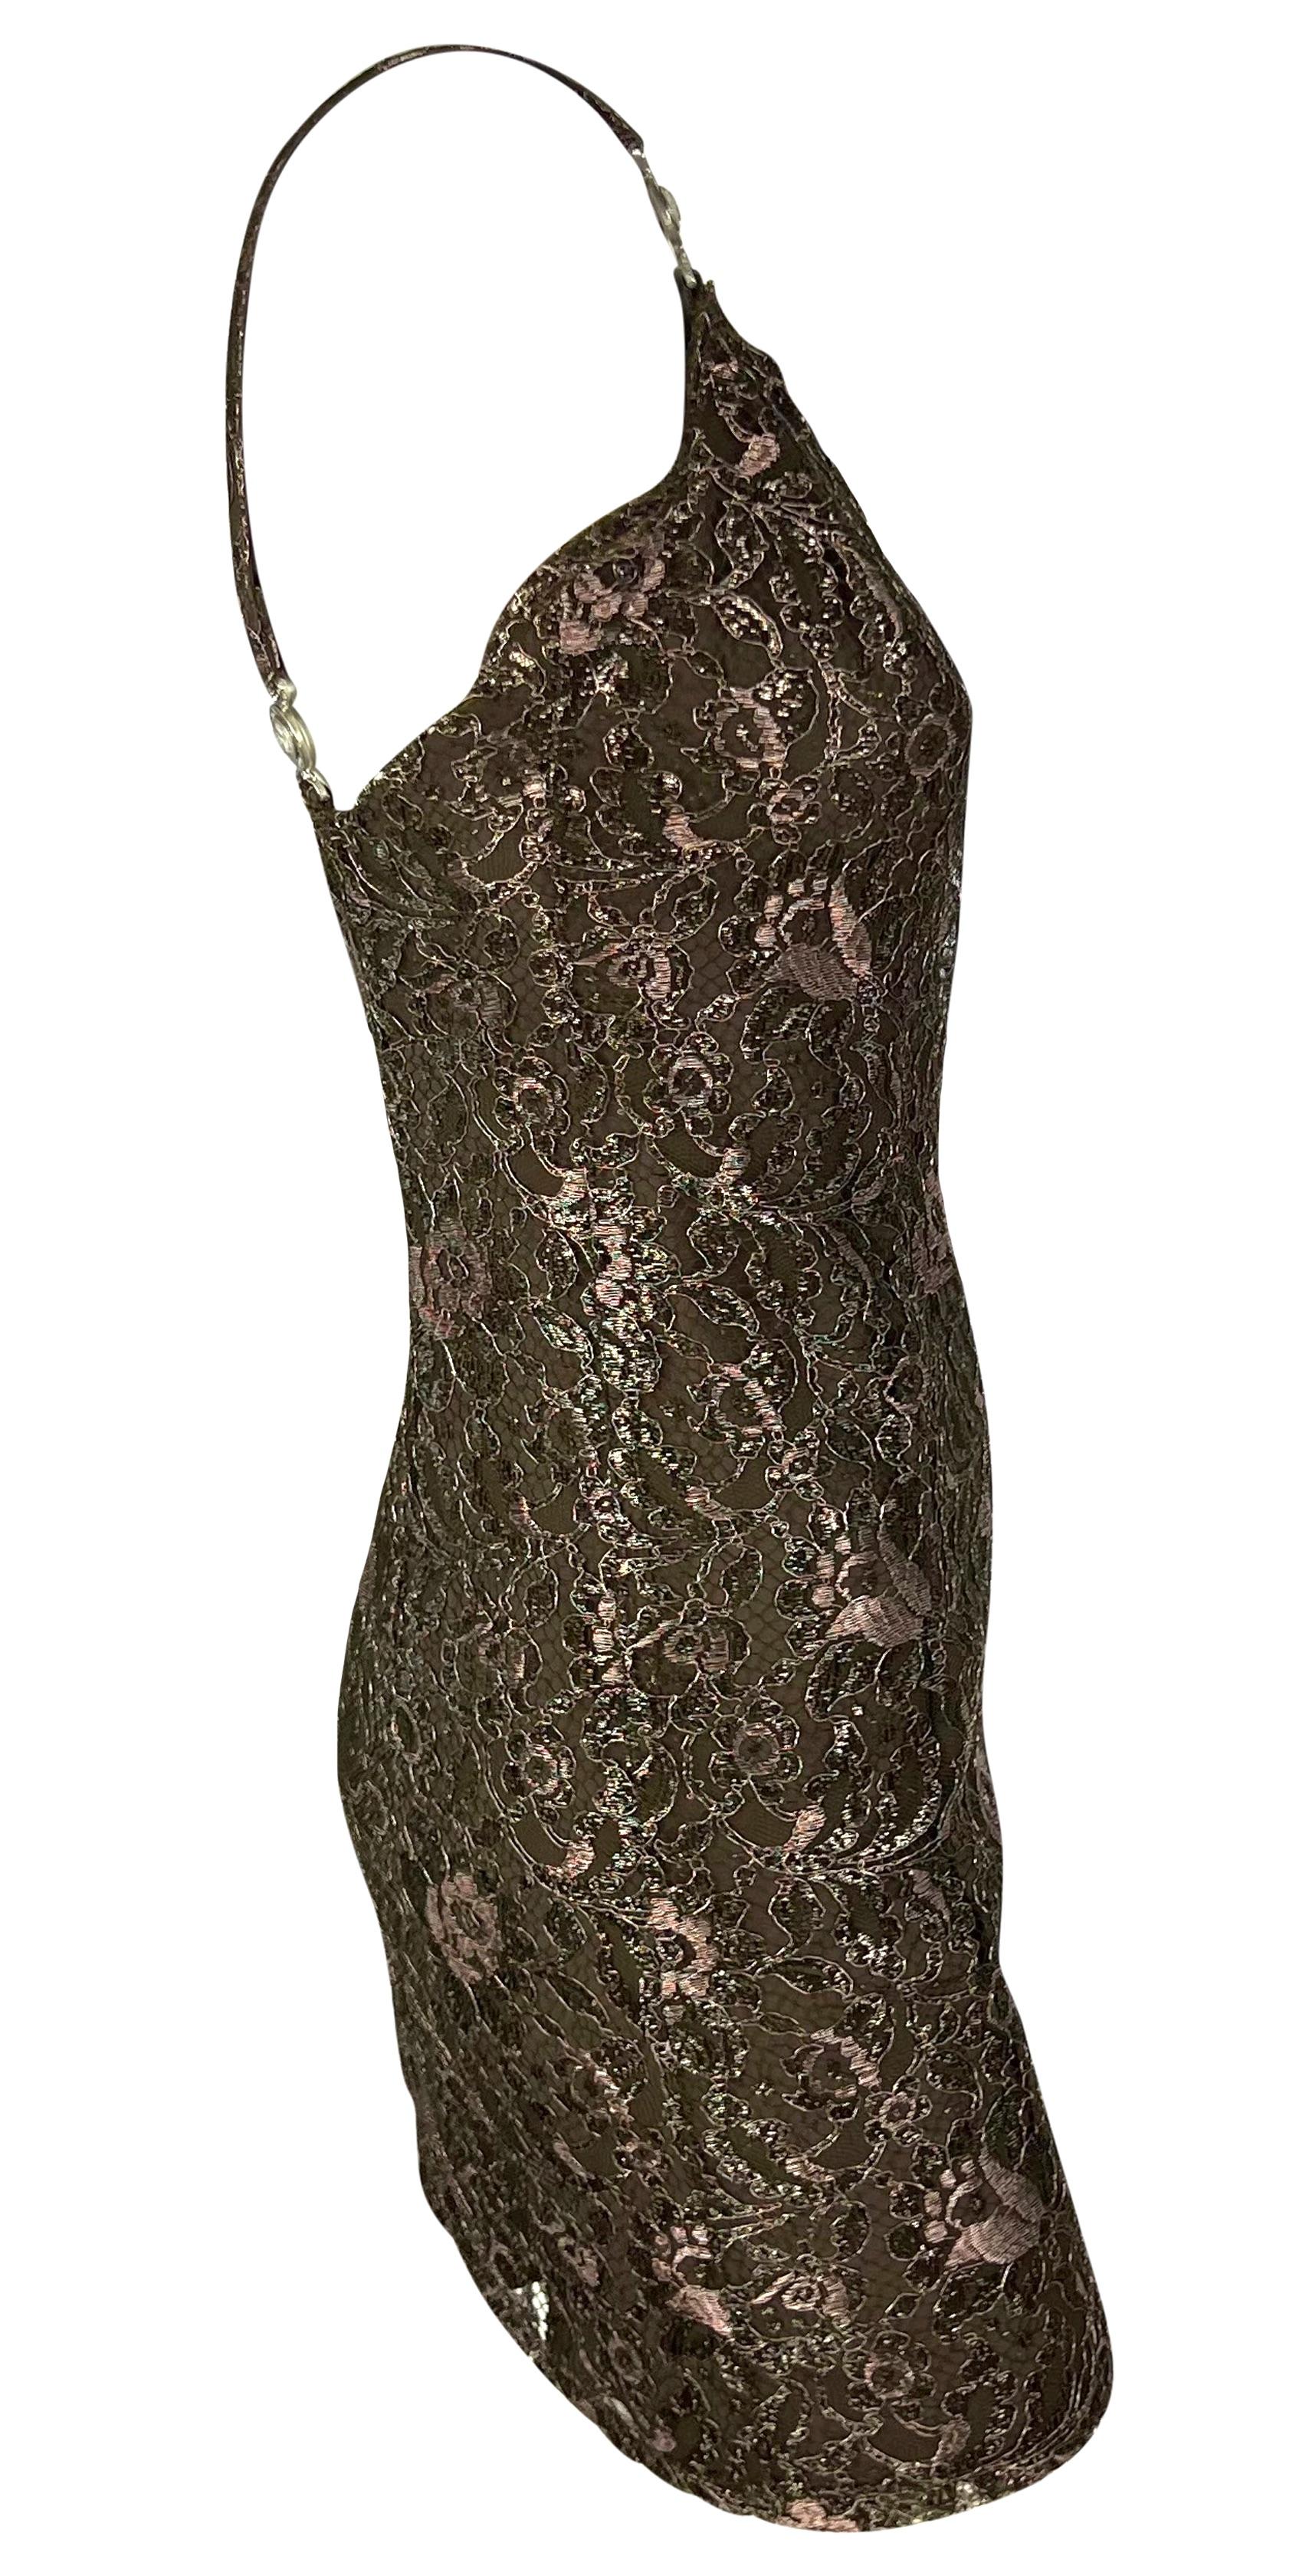 F/W 1996 Gianni Versace Couture Metallic Brown Floral Lace Medusa Mini Dress For Sale 2